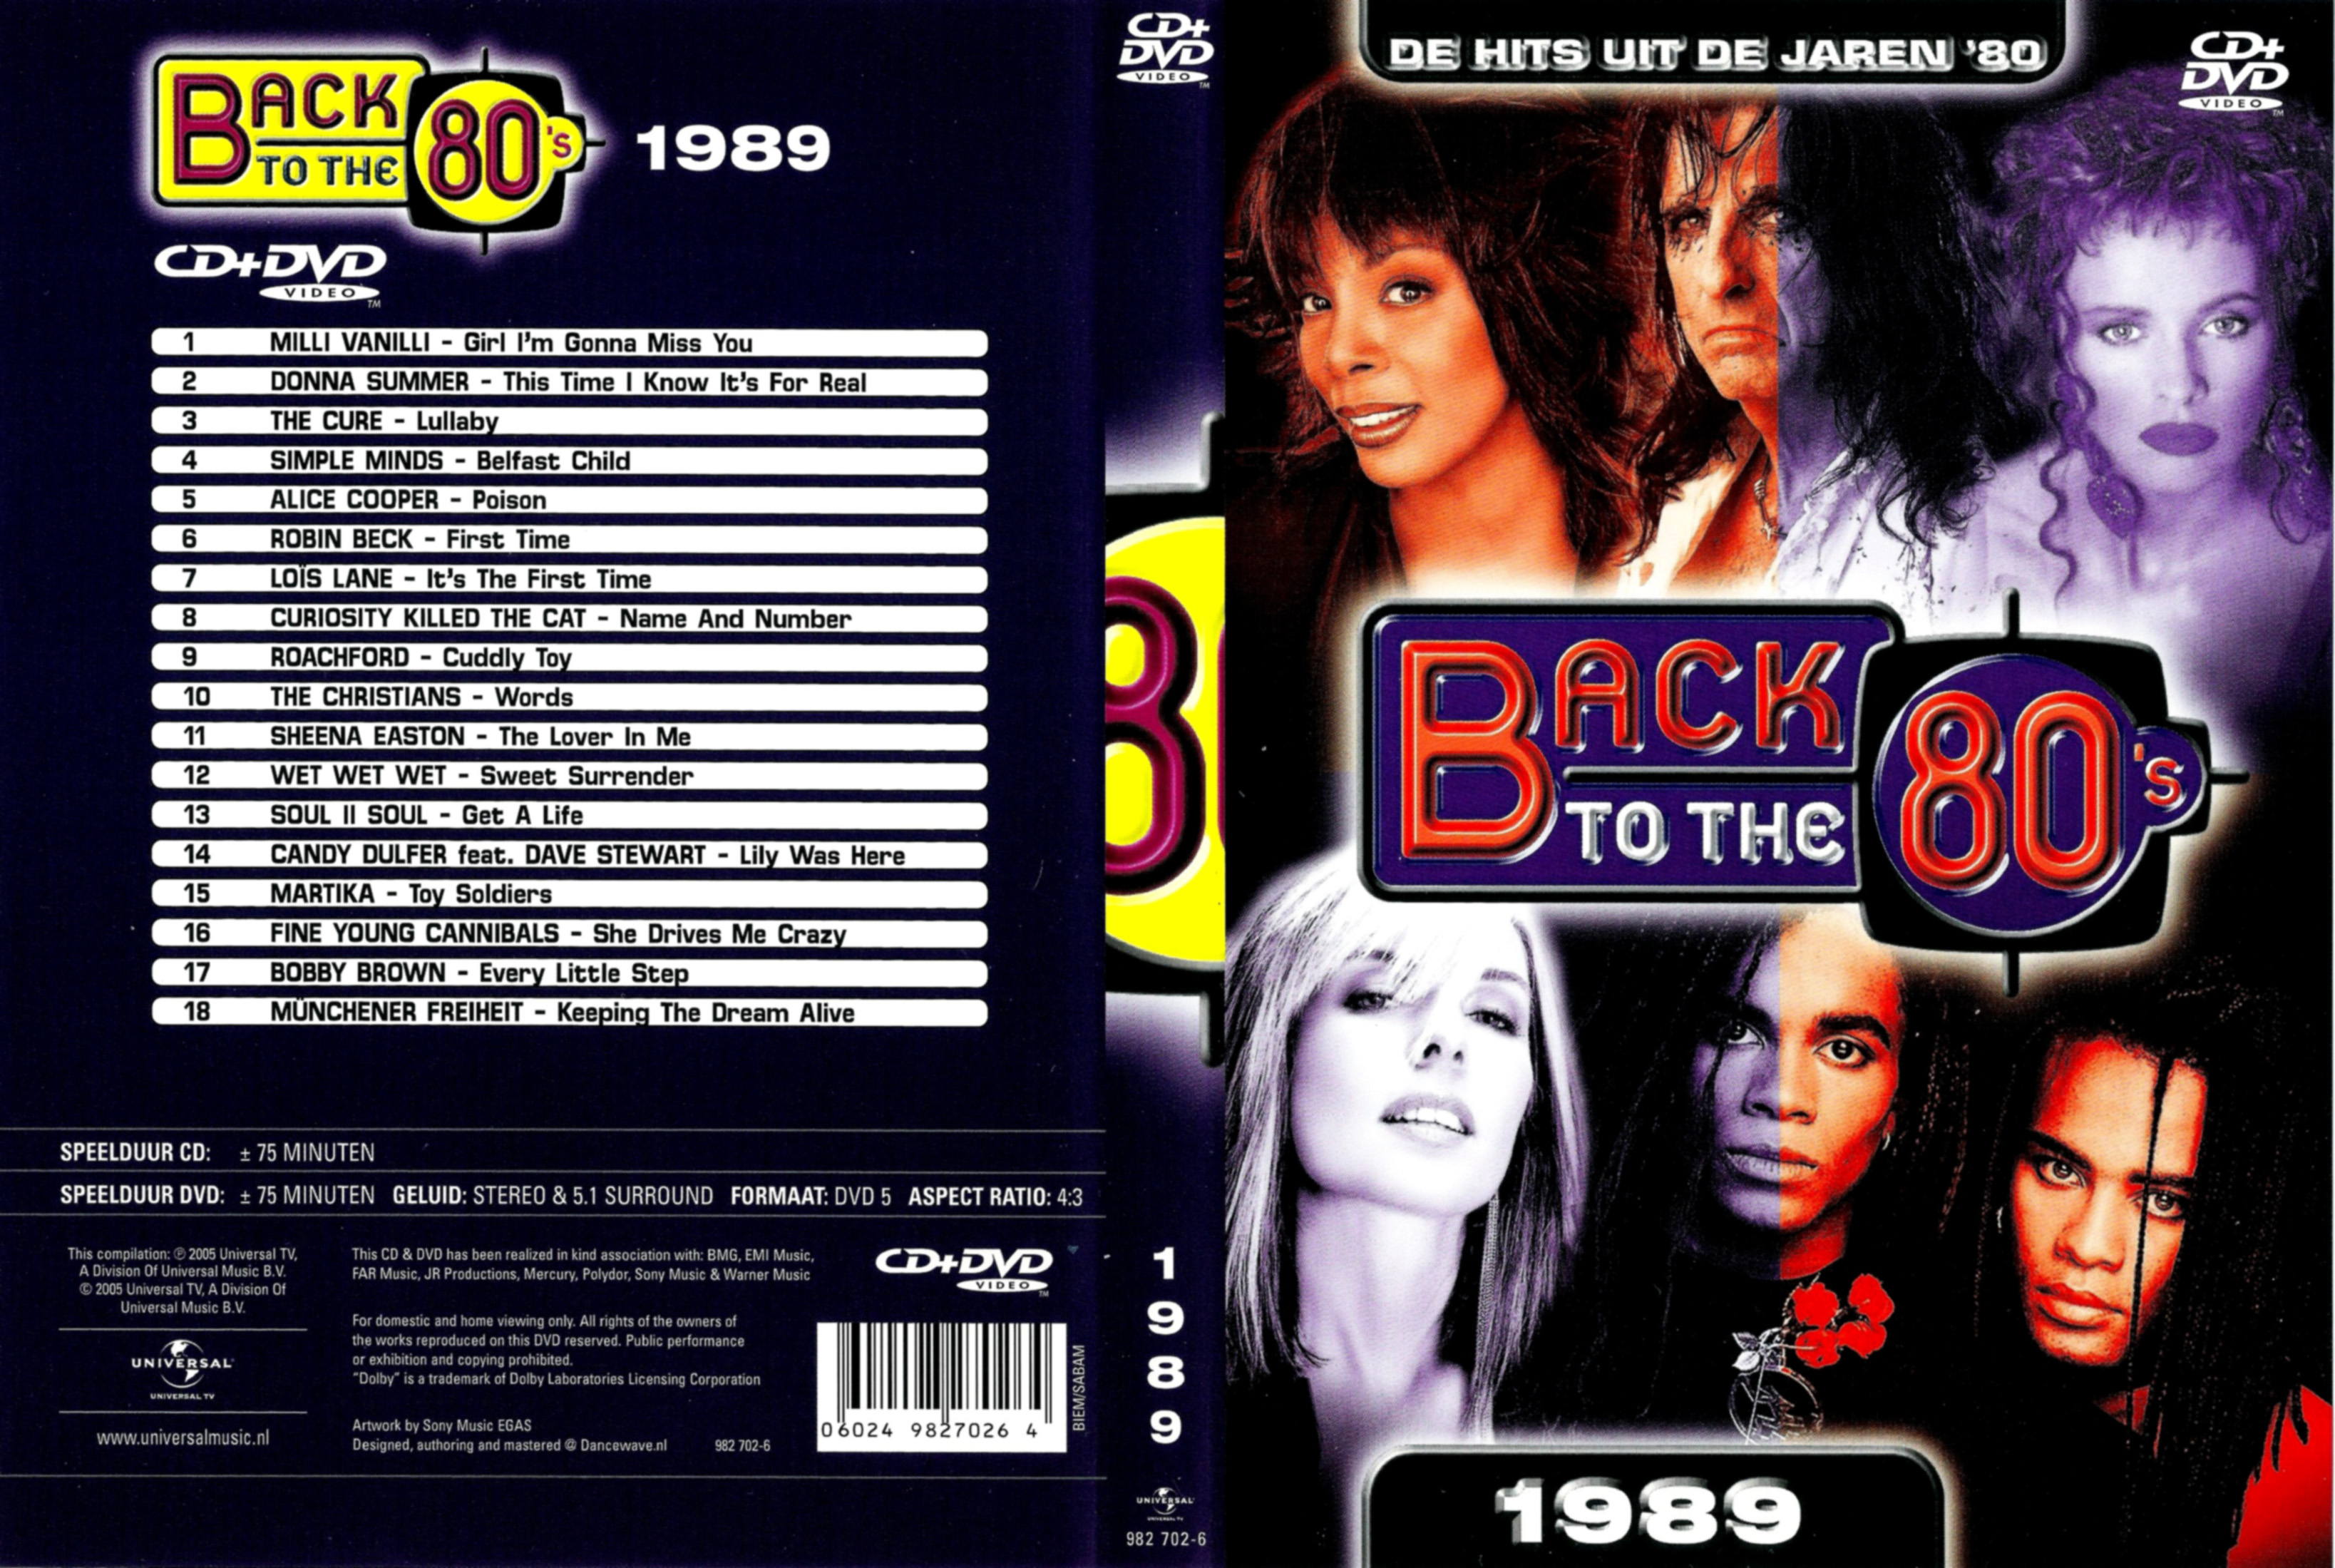 Jaquette DVD Back to the 80